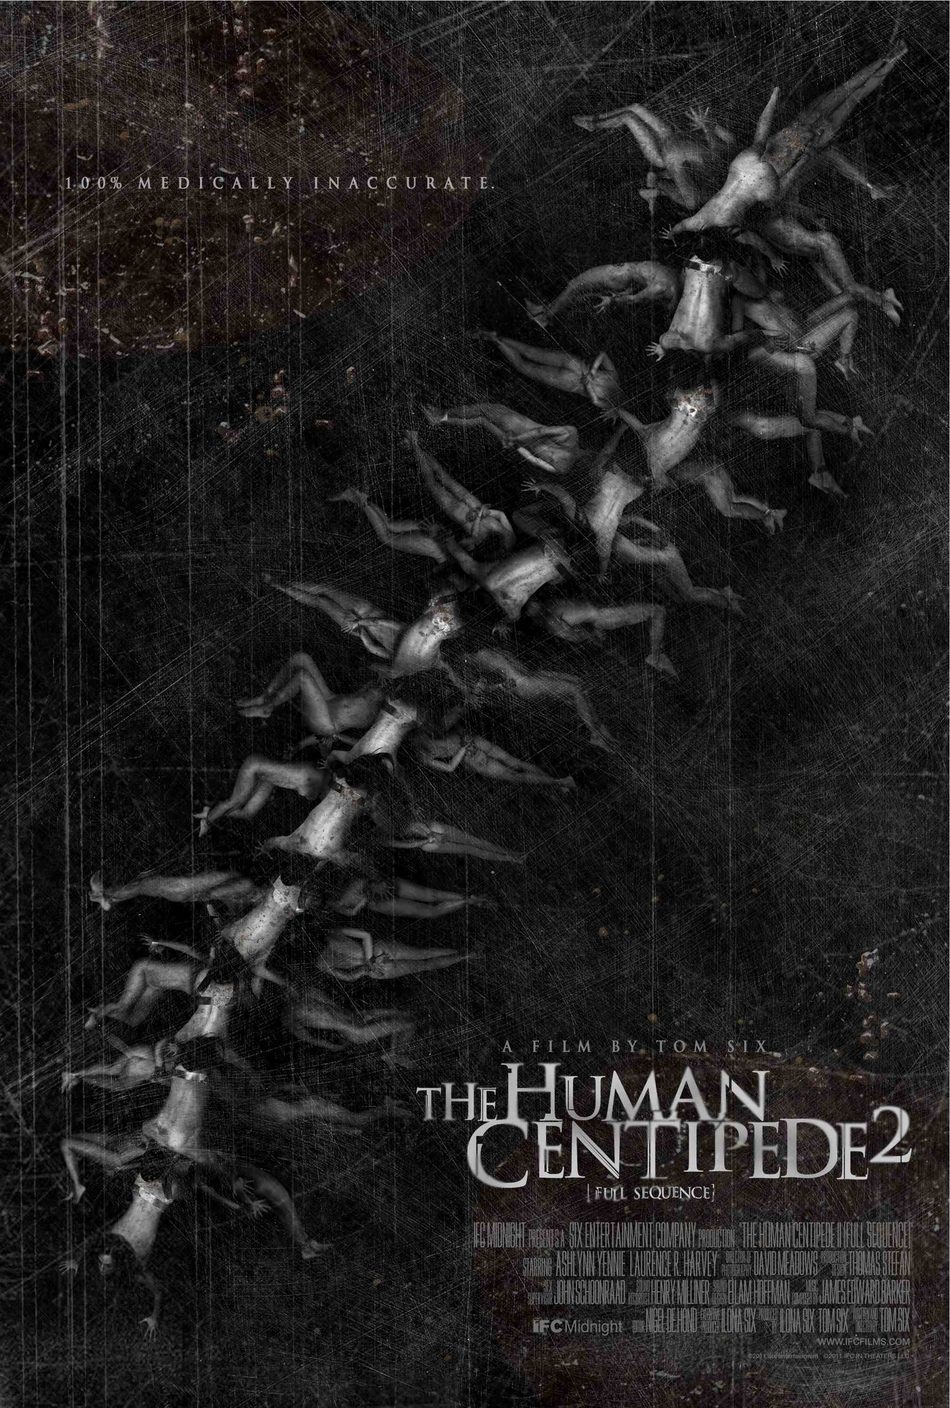 Poster of The Human Centipede 2 (Full Sequence) - EEUU